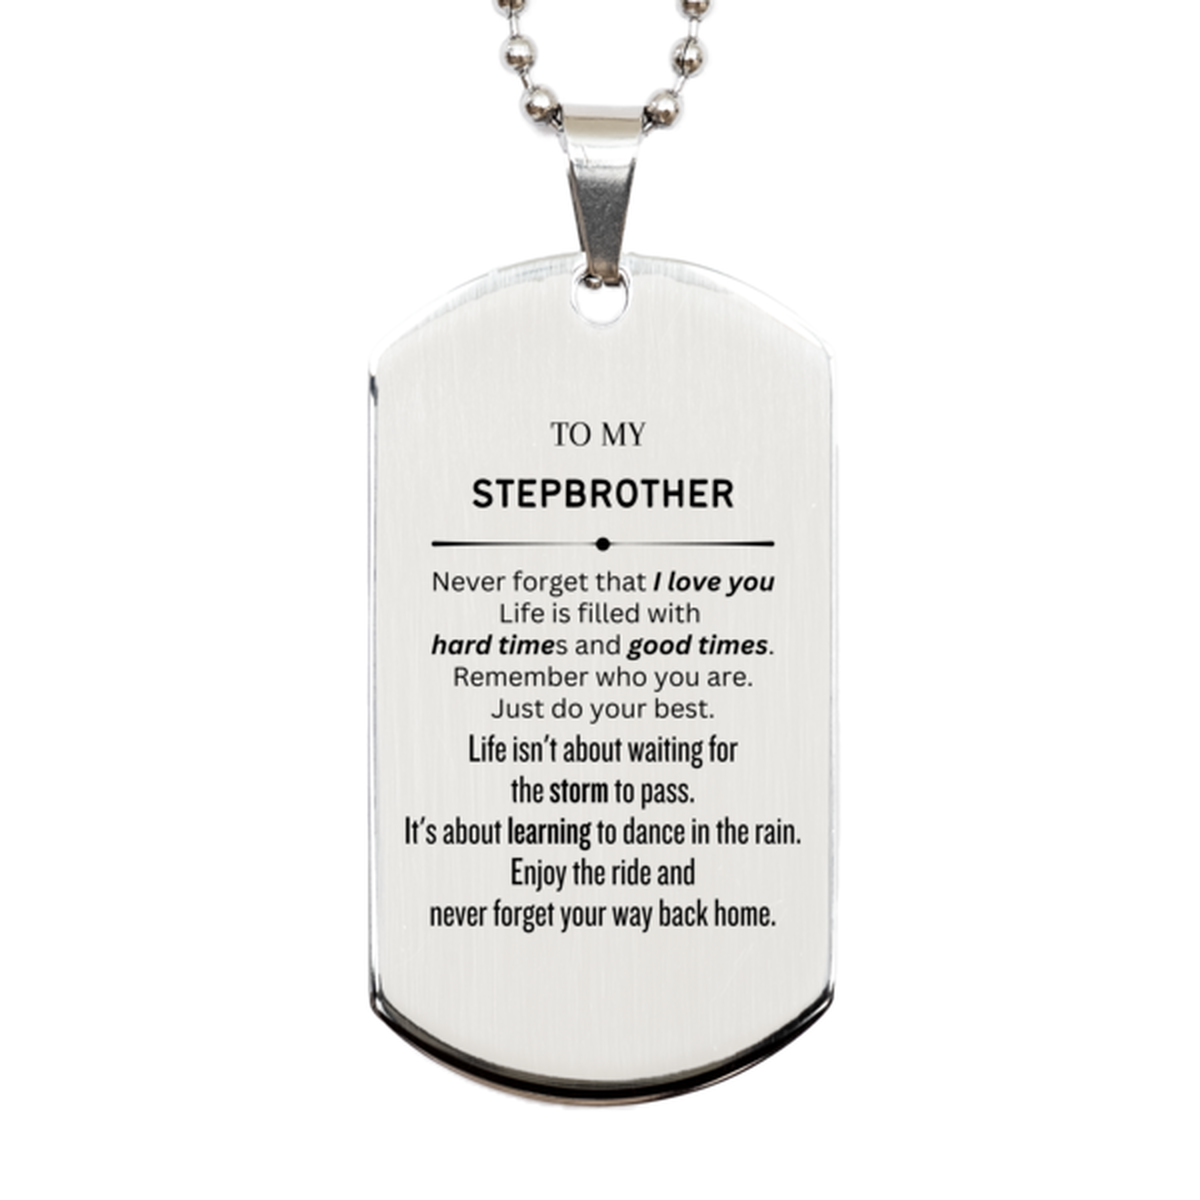 Christmas Stepbrother Silver Dog Tag Gifts, To My Stepbrother Birthday Thank You Gifts For Stepbrother, Graduation Unique Gifts For Stepbrother To My Stepbrother Never forget that I love you life is filled with hard times and good times. Remember who you